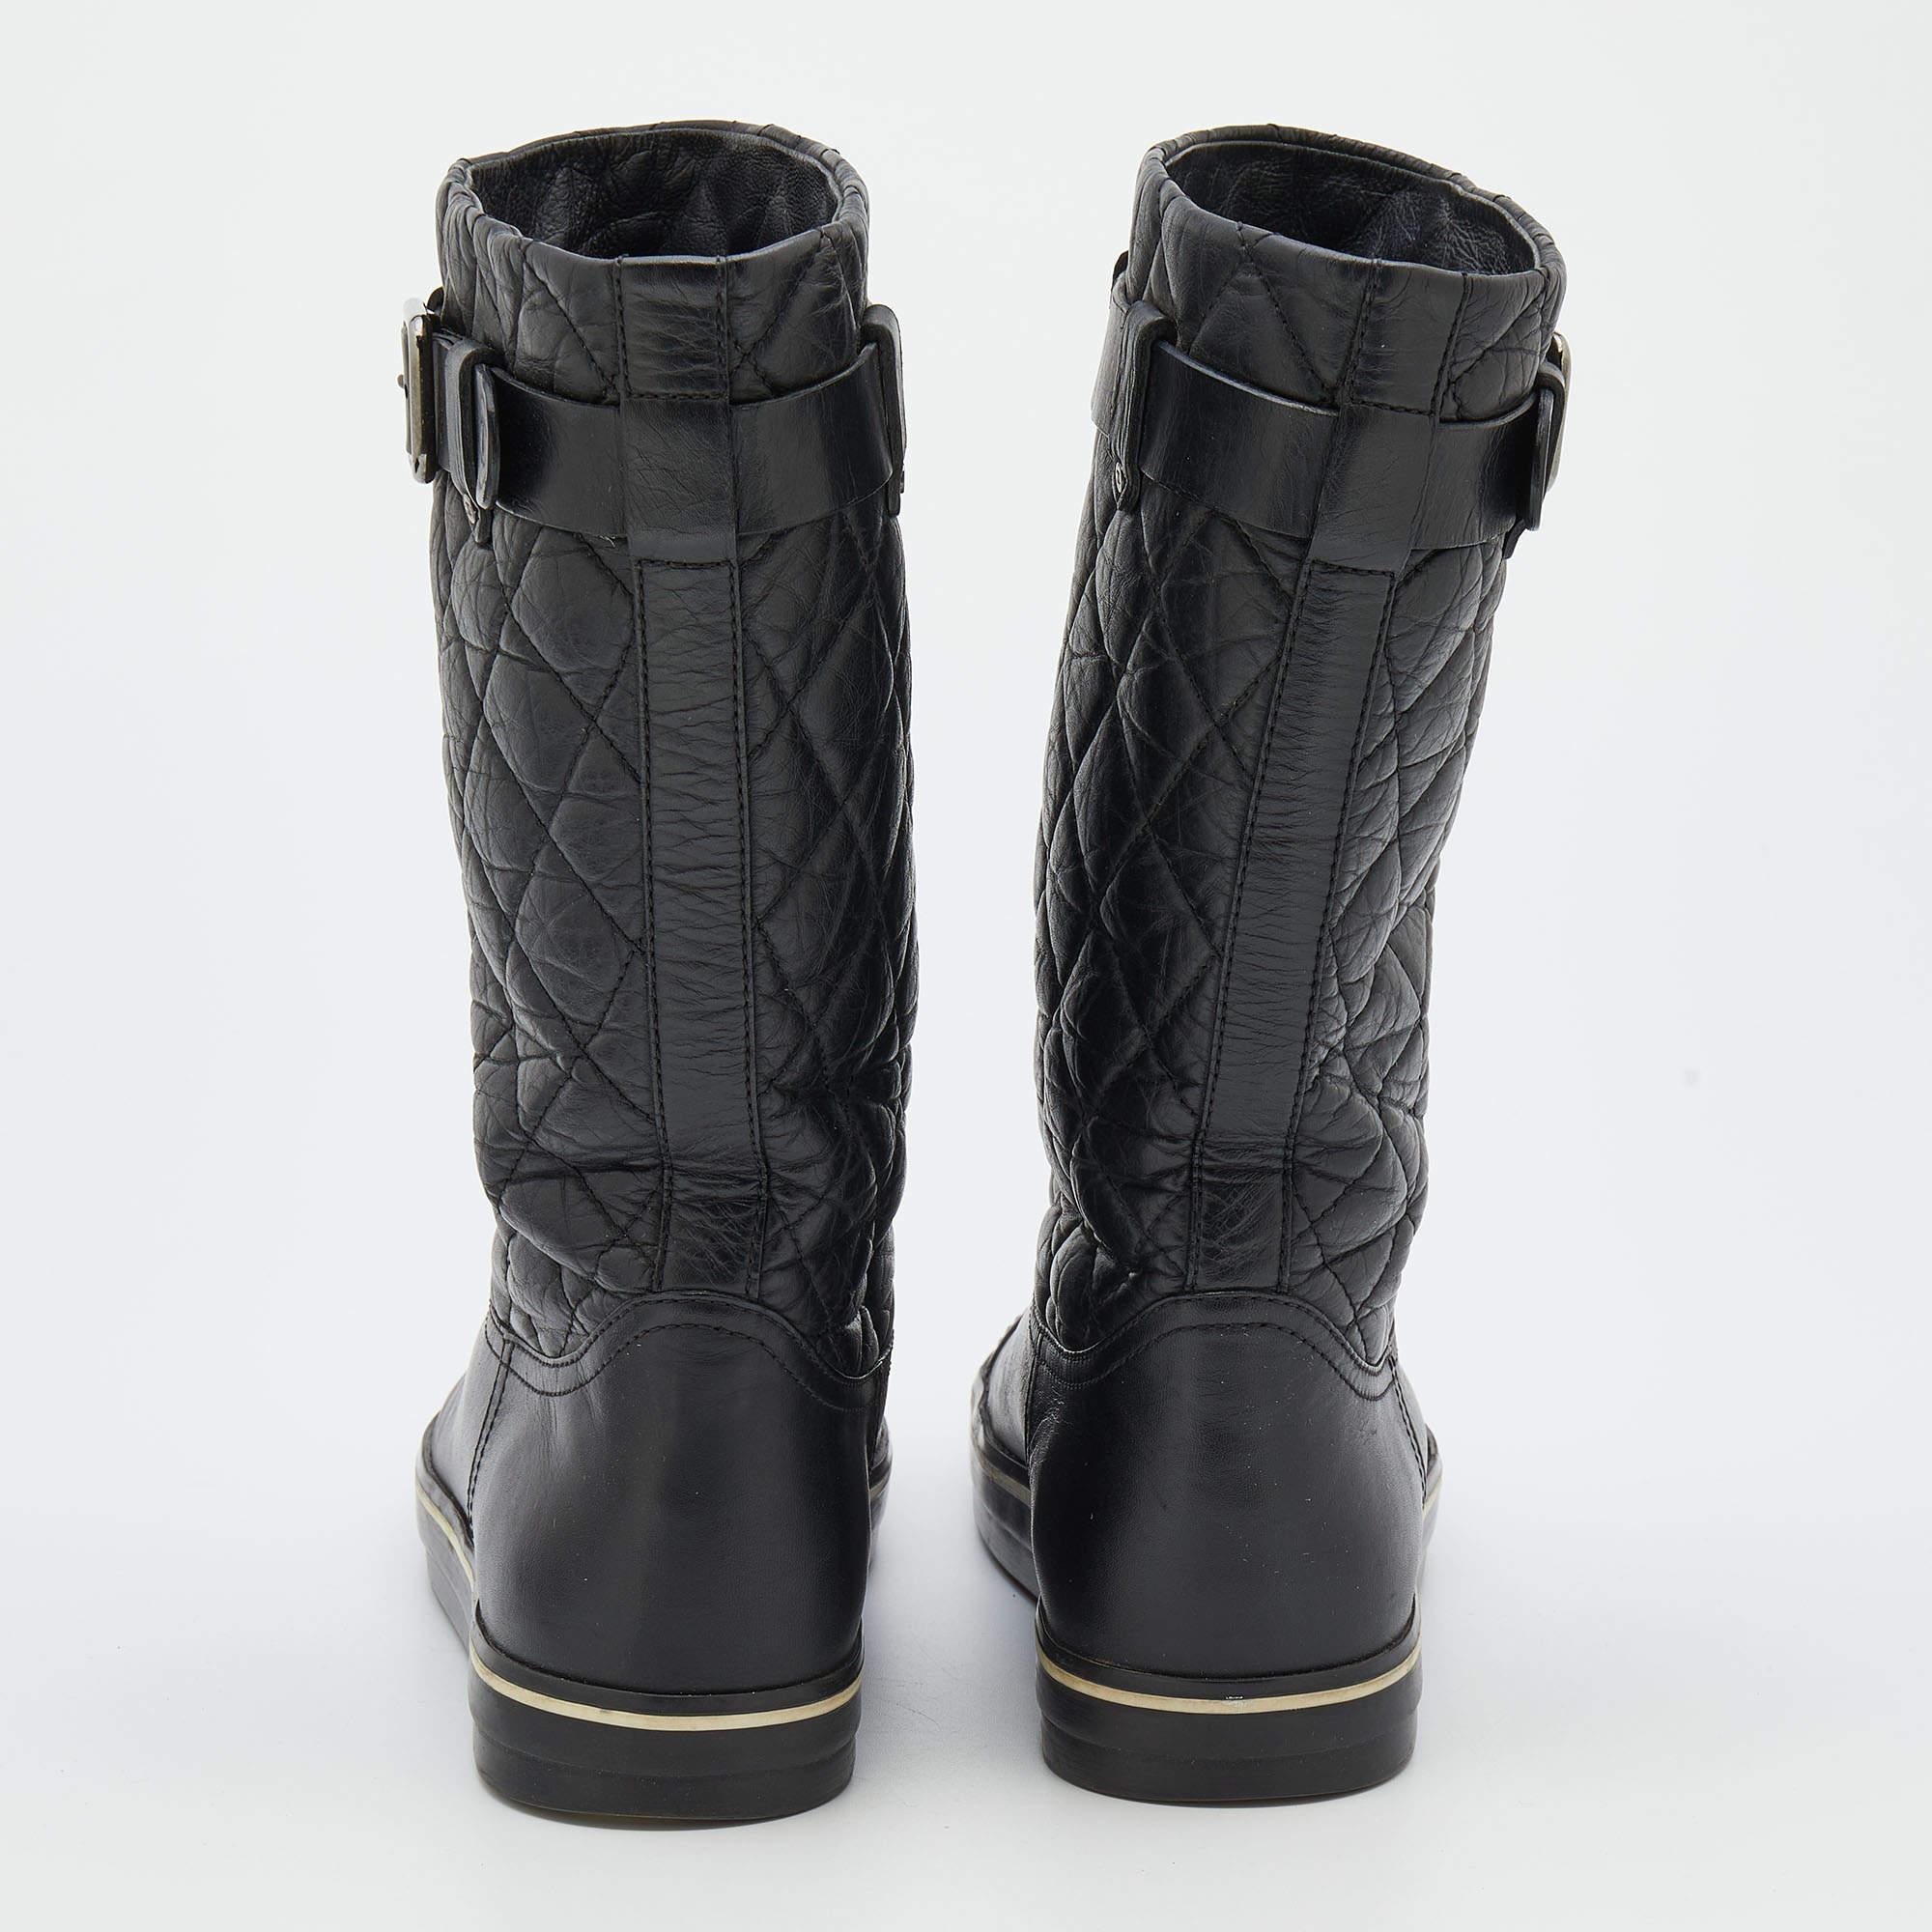 Chanel Black Quilted Leather Mid Calf Length Boots Size 37.5 3